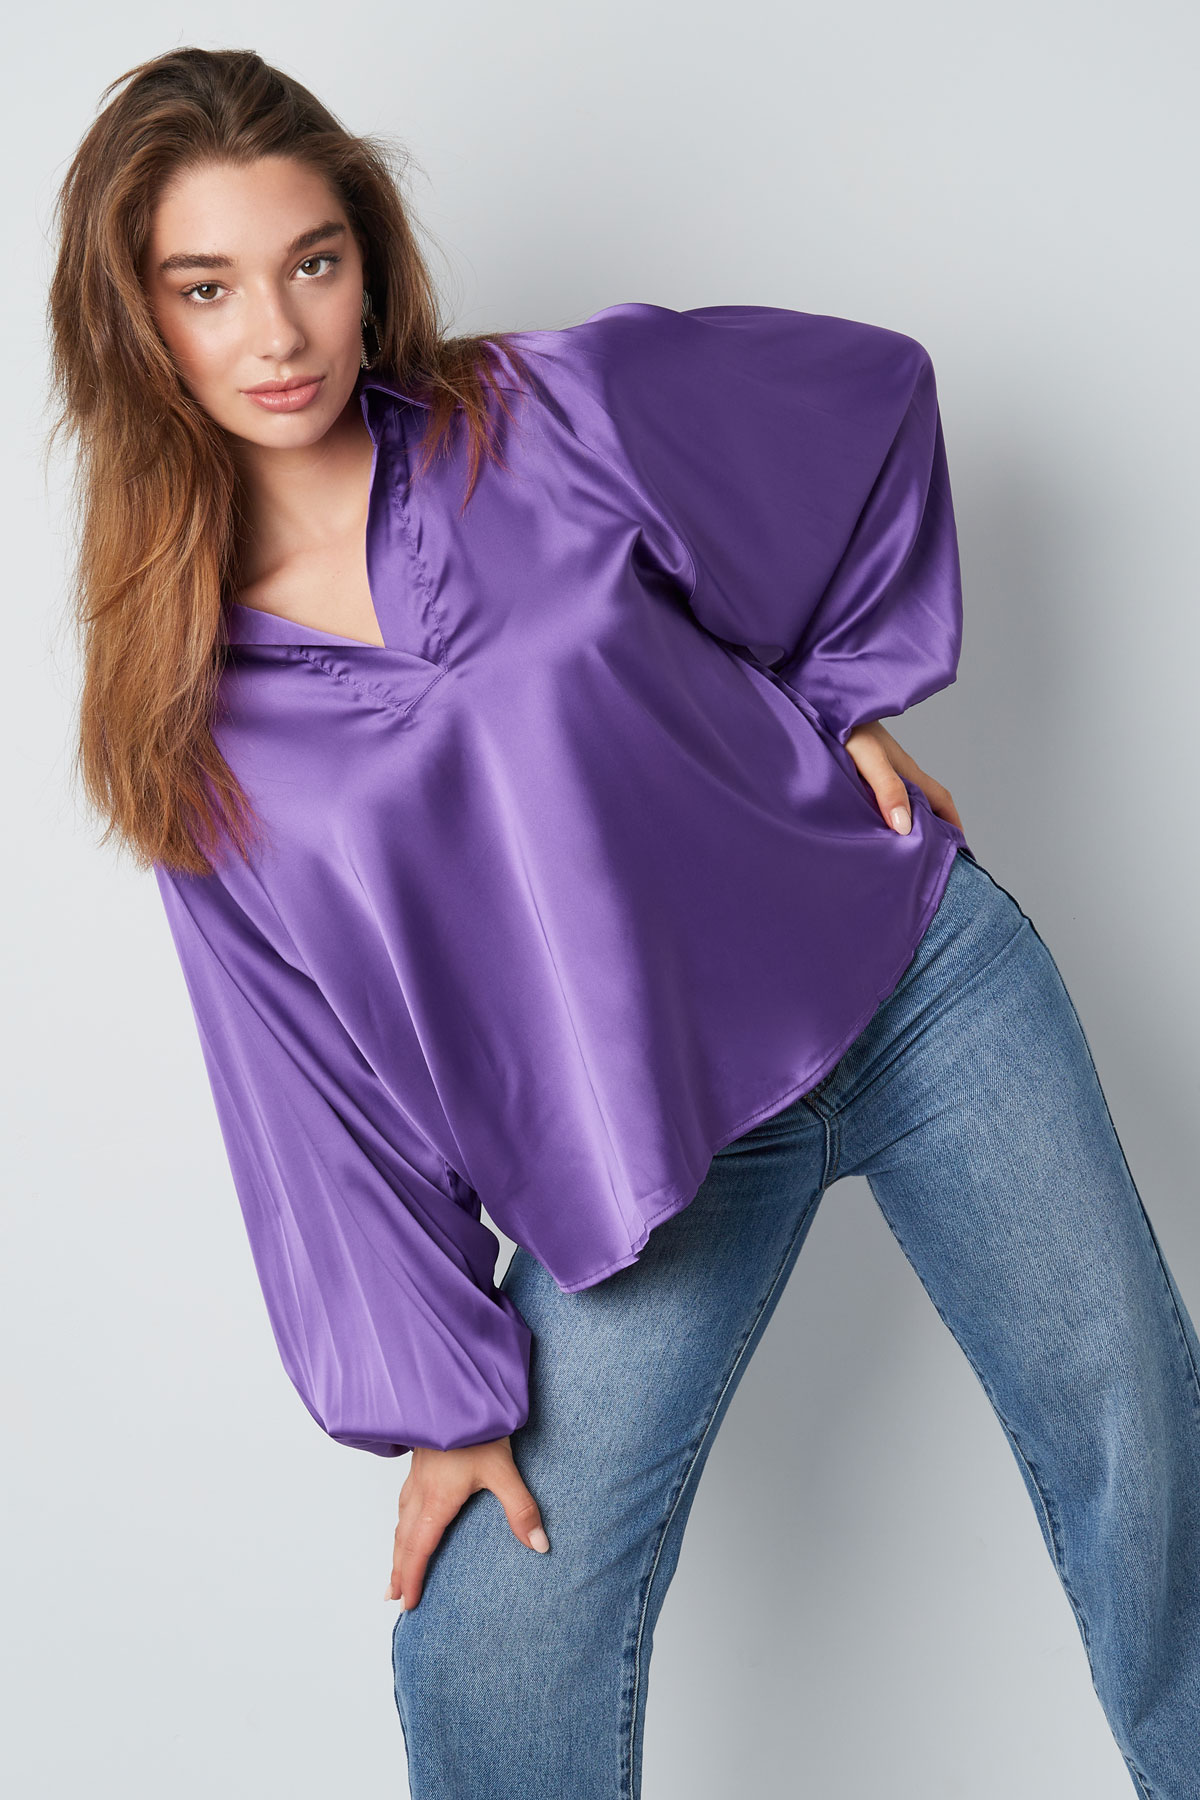 Blouse puffed sleeve purple Picture10